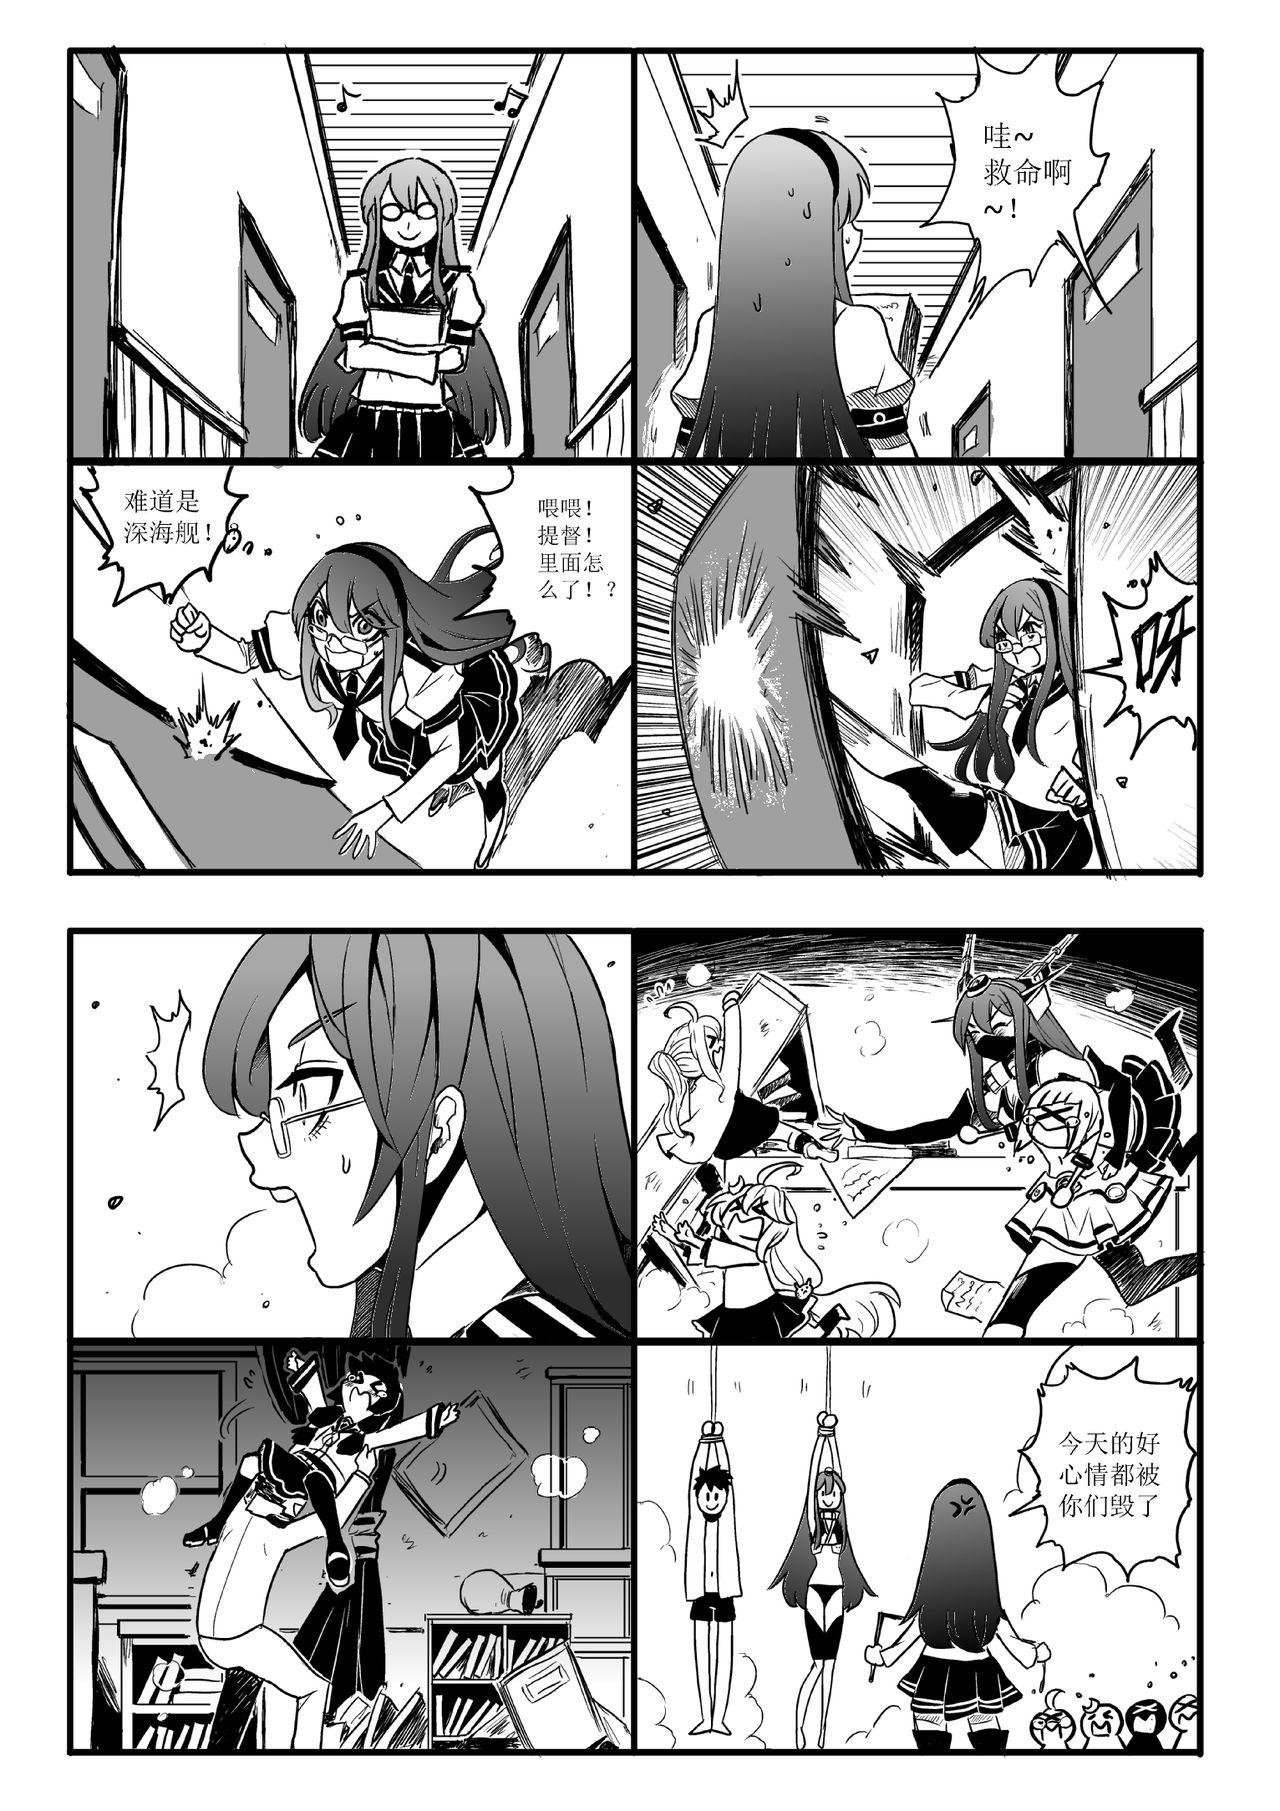 Outside 四格 - Kantai collection Hot Women Having Sex - Page 10